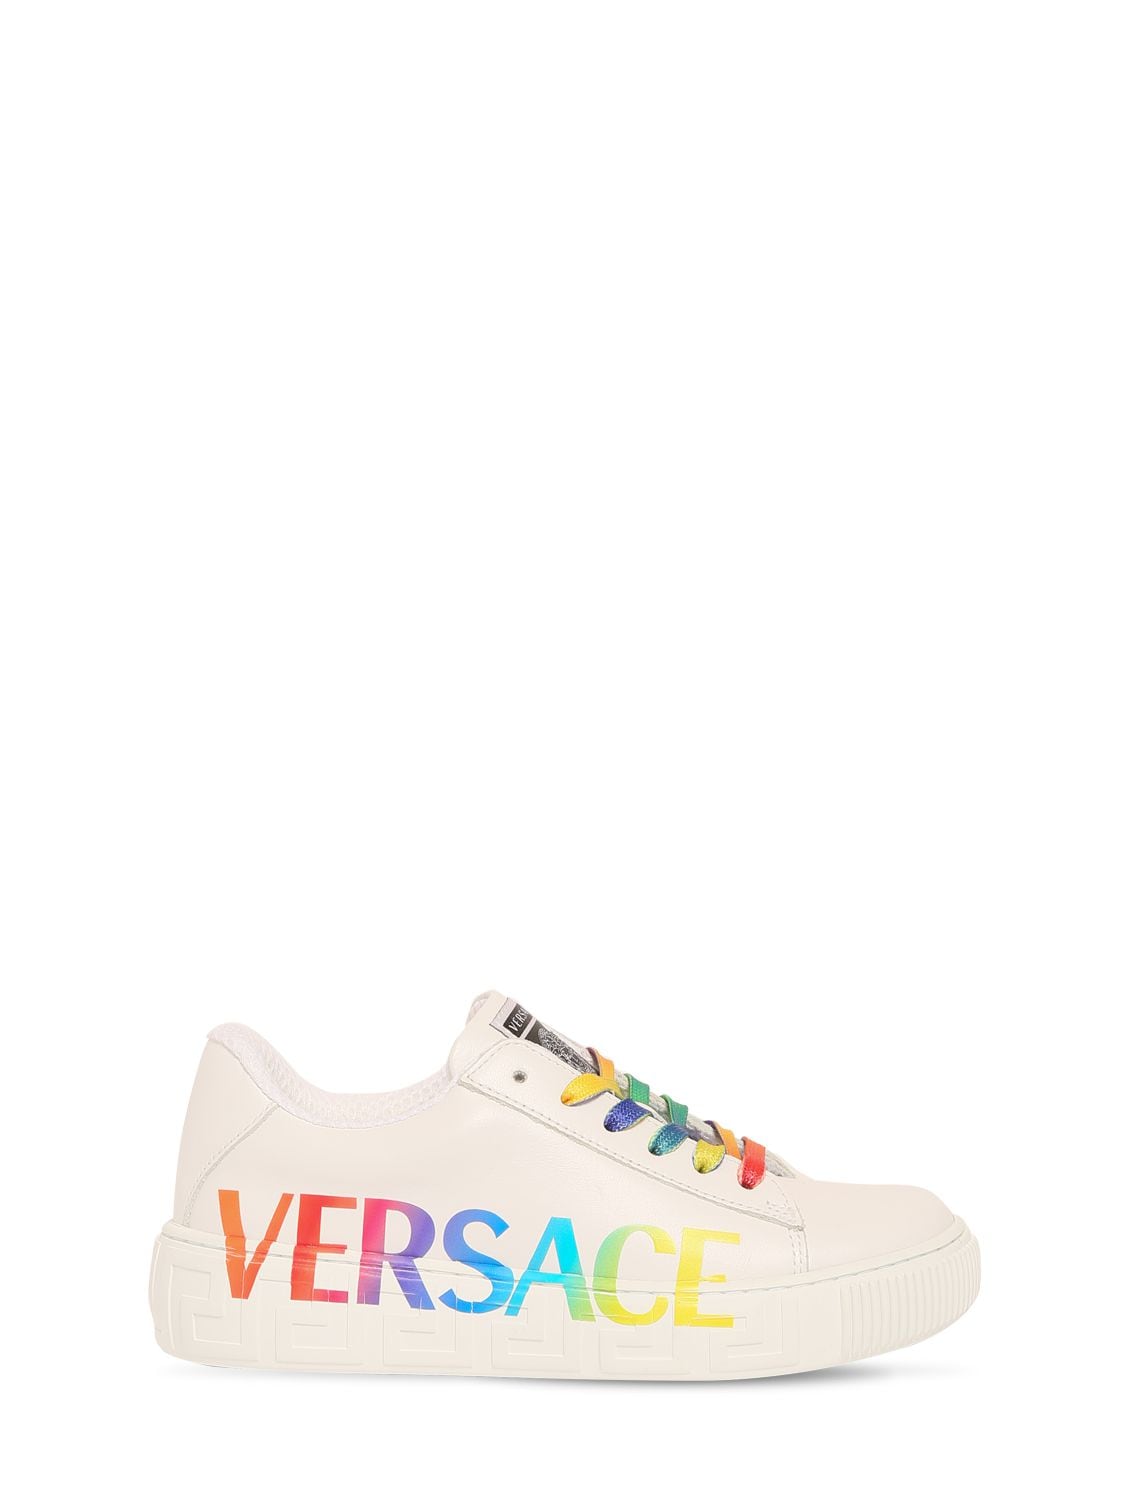 VERSACE LOGO PRINT LACE-UP LEATHER trainers